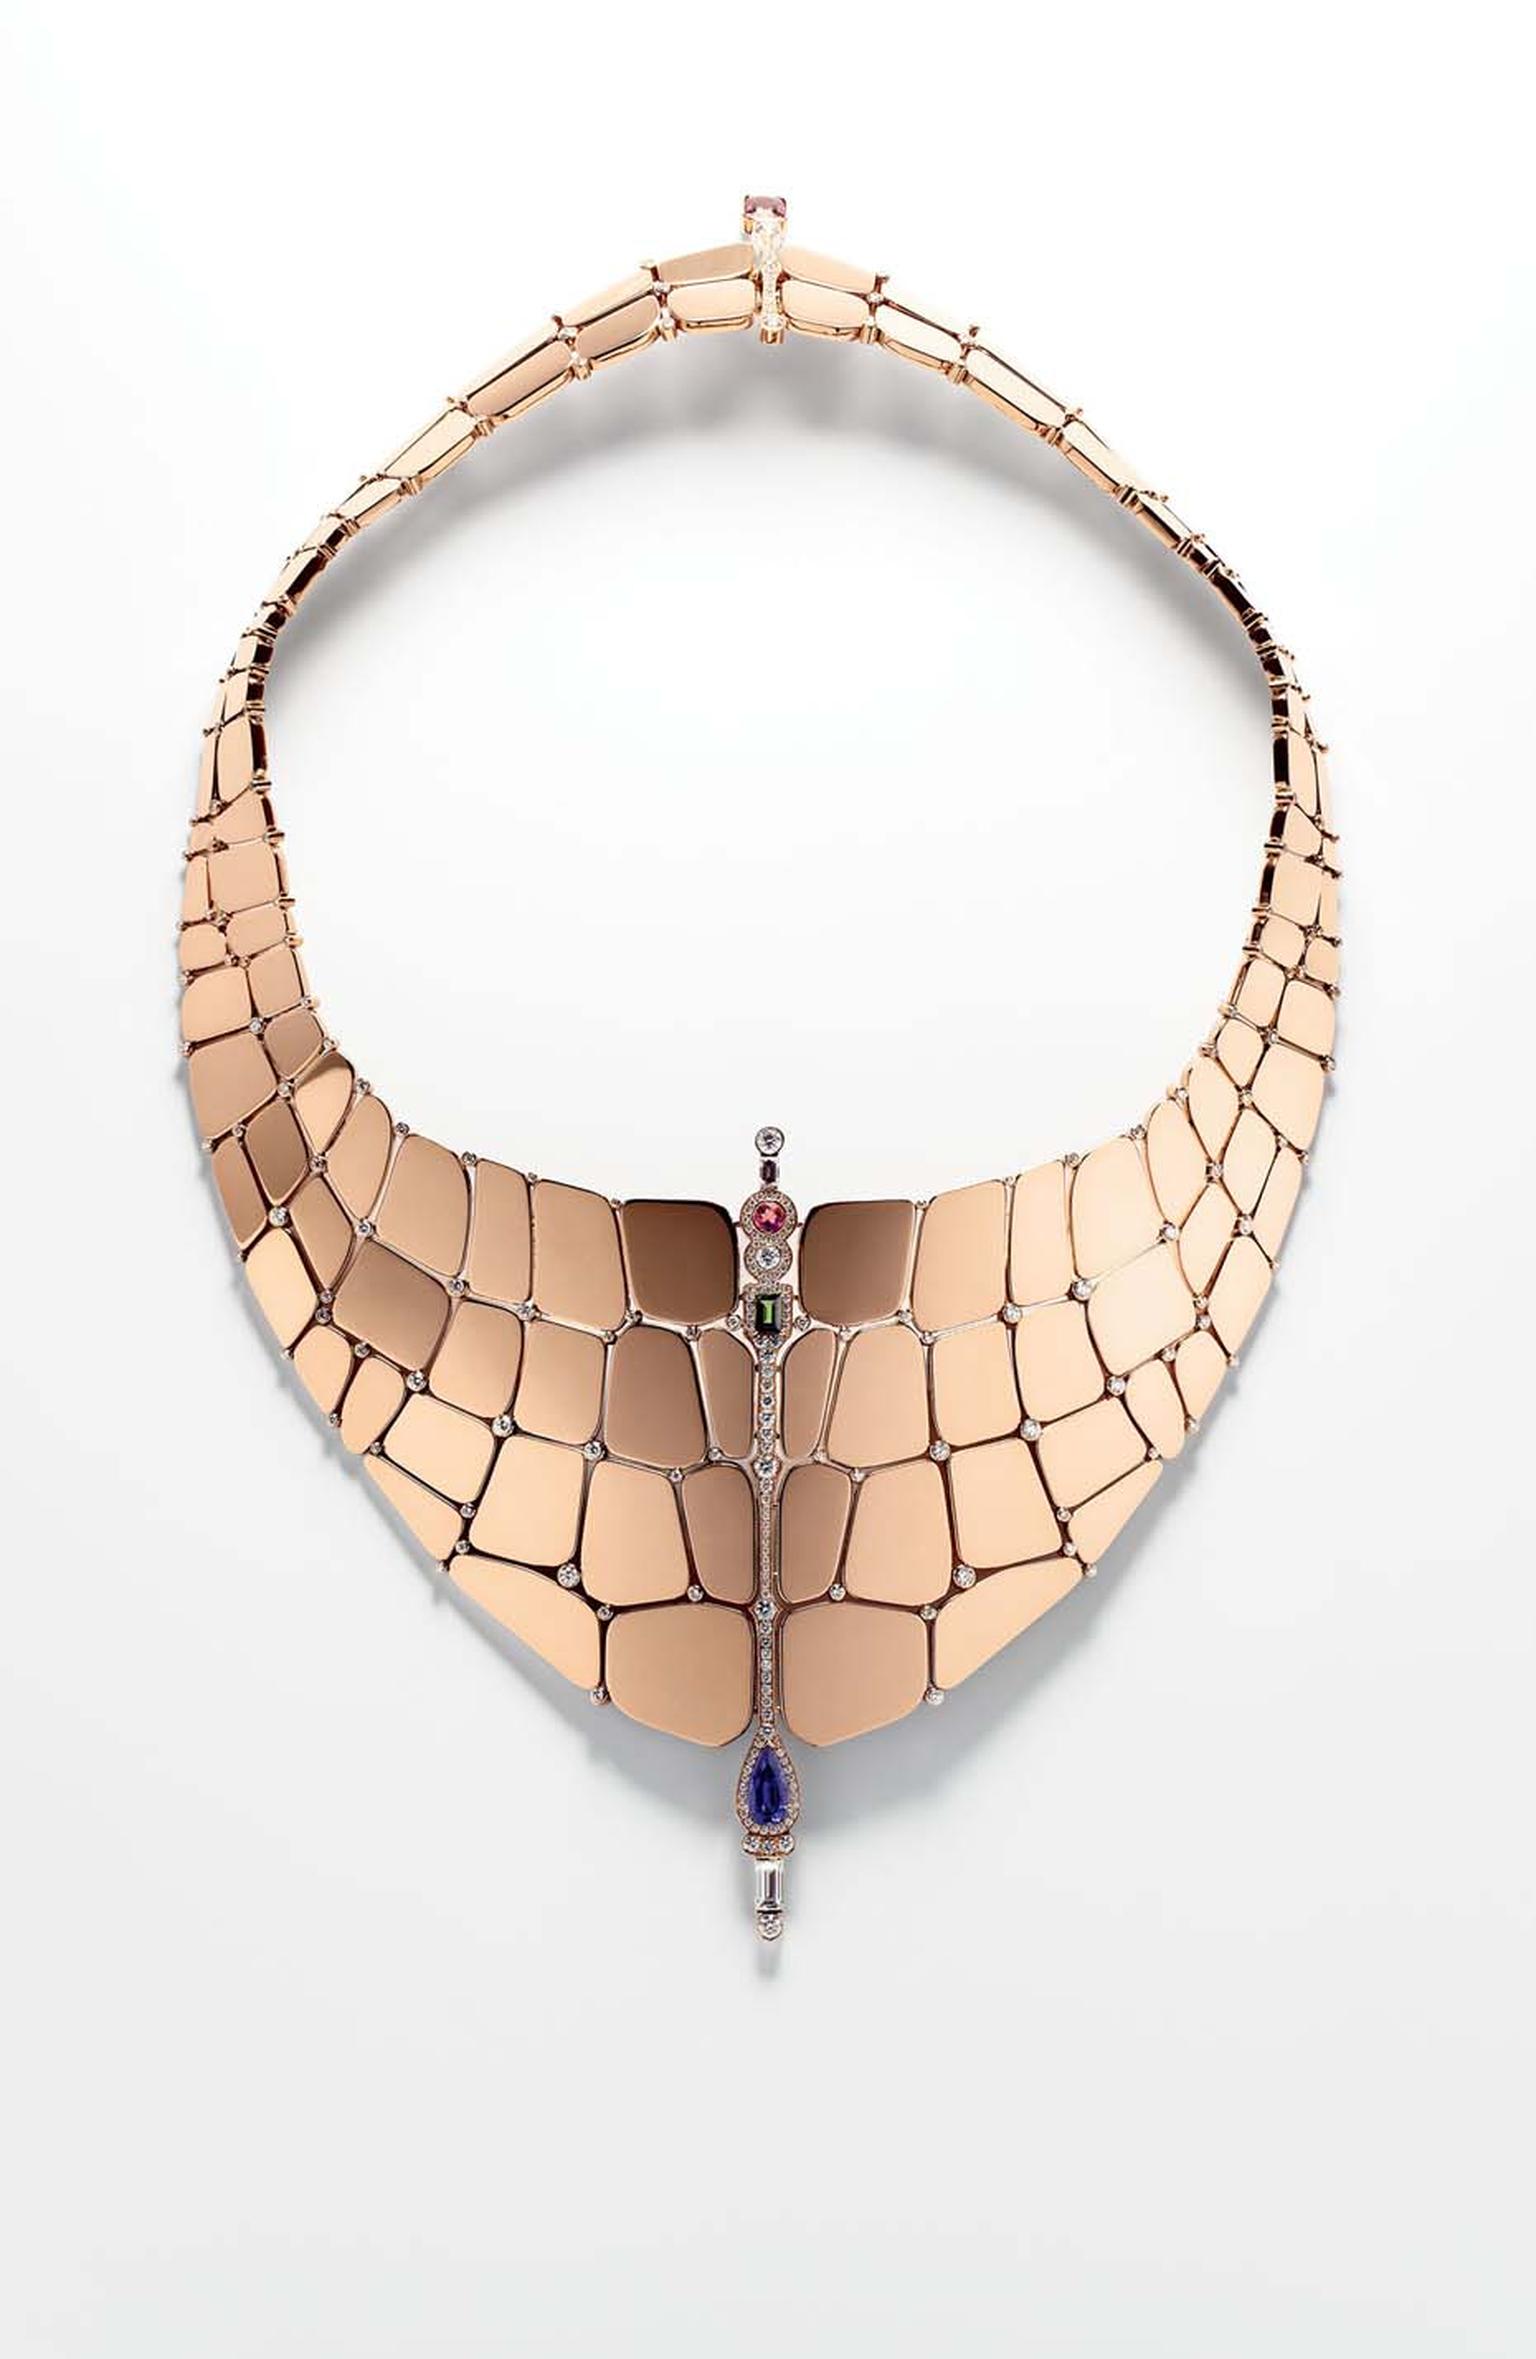 Hermès Niloticus necklace in rose gold, diamonds and coloured stones